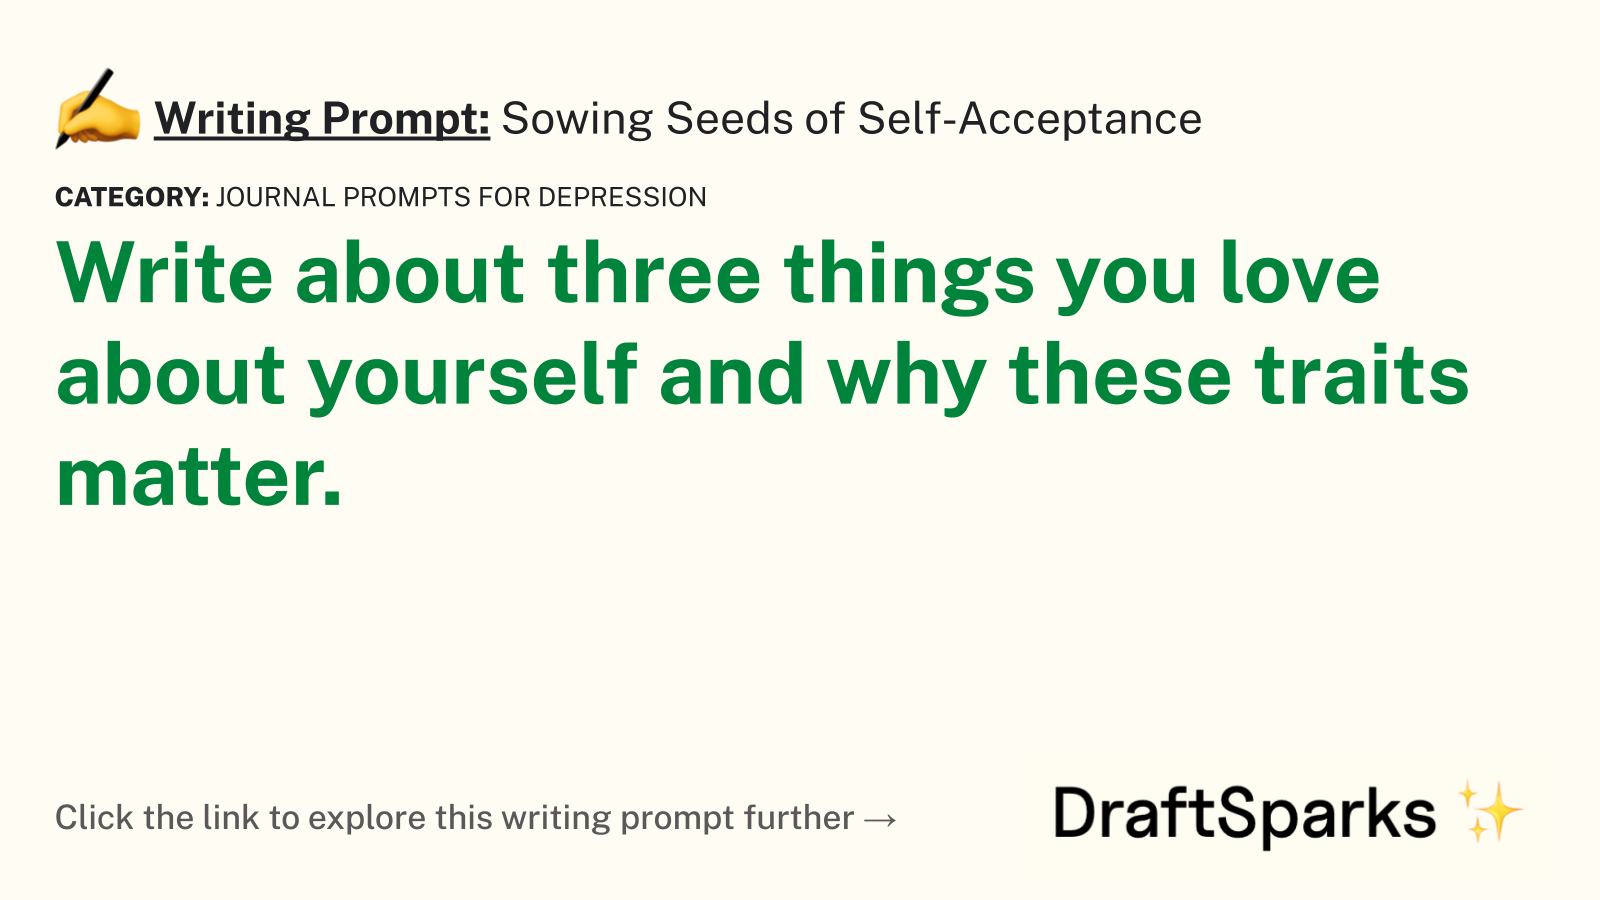 Sowing Seeds of Self-Acceptance